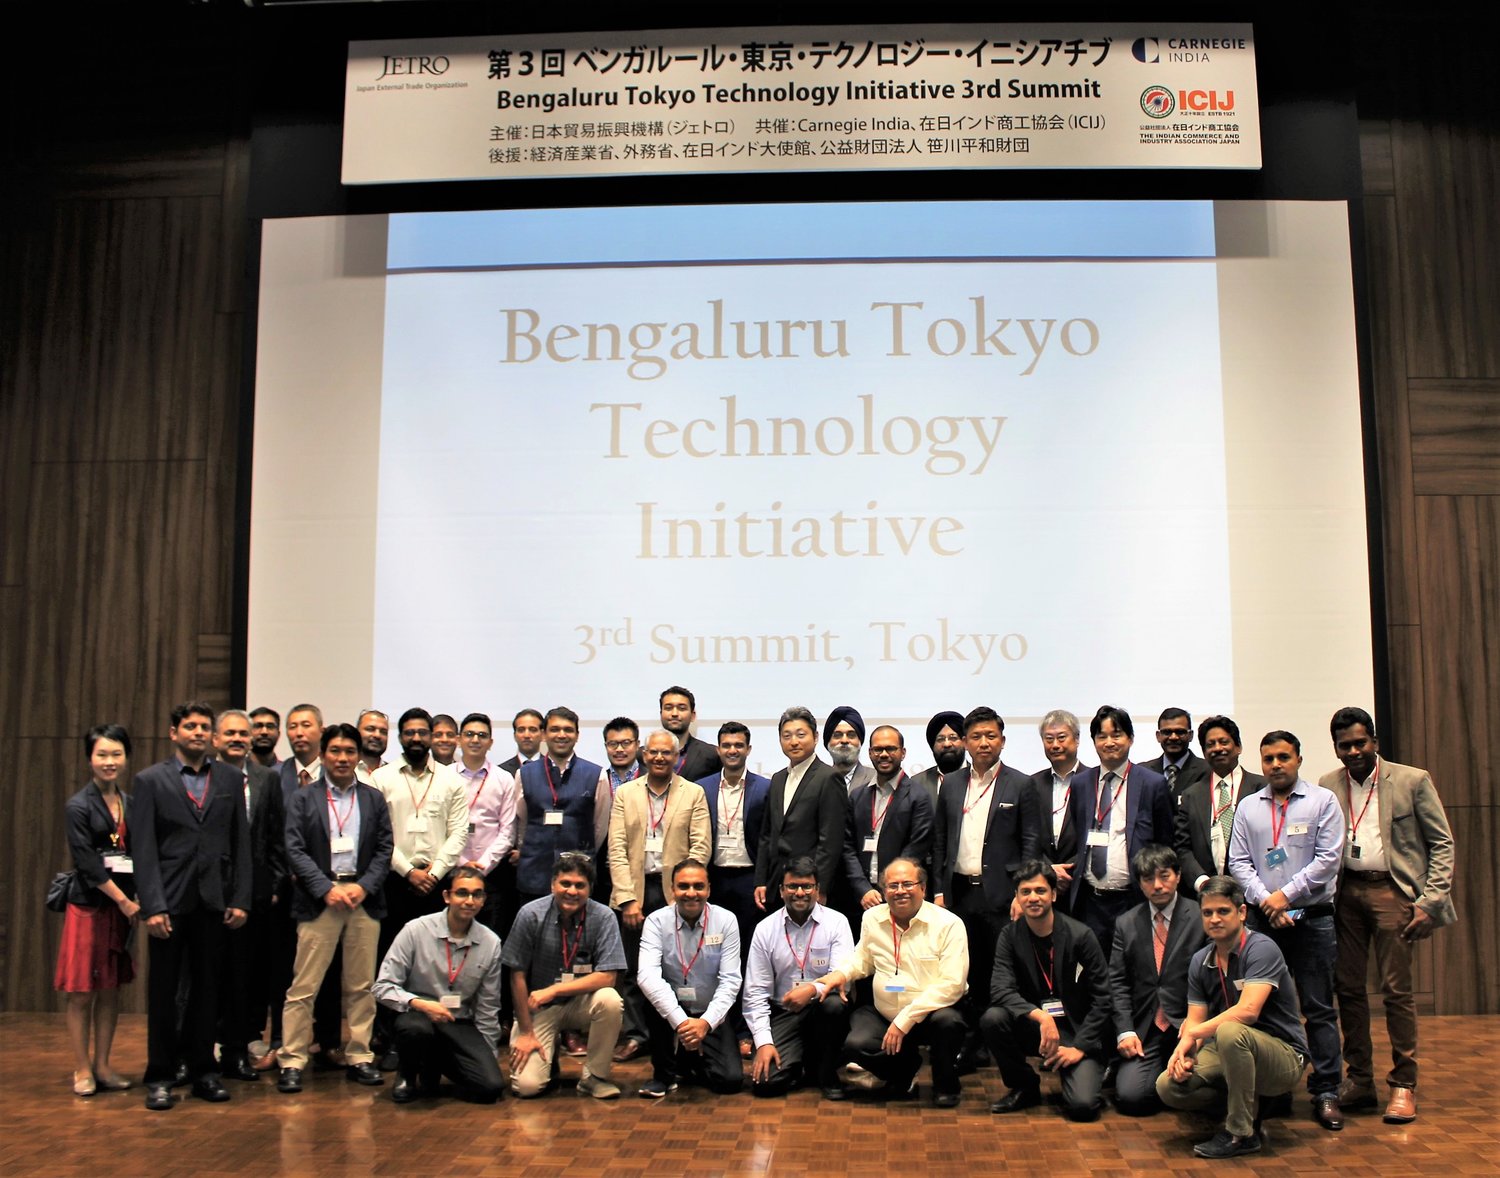 Industry, Academia and Government Come Together in a Pursuit for Global Innovation and Furtherance of India-Japan Partnership at the Third Summit of Bengaluru Tokyo Technology Initiative (BTTI)